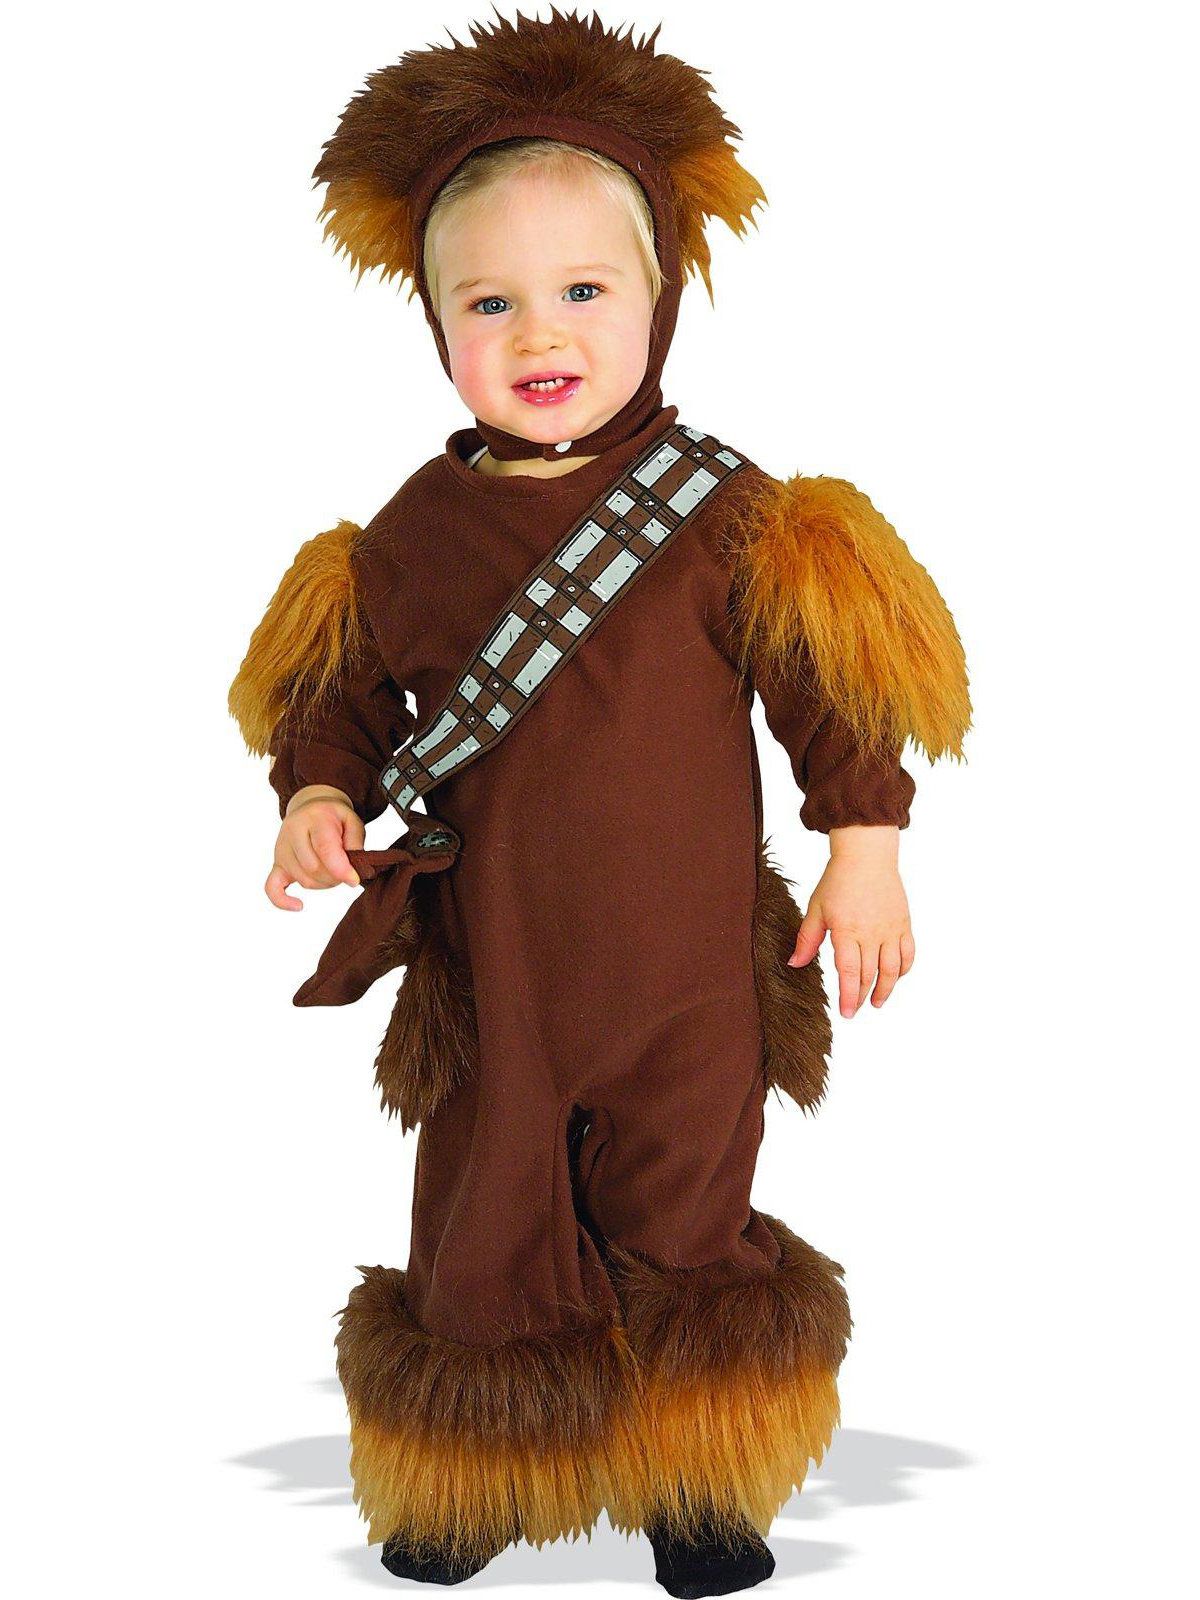 Star Wars Chewbacca Fleece Infant / Toddler Costume - PartyBell.com